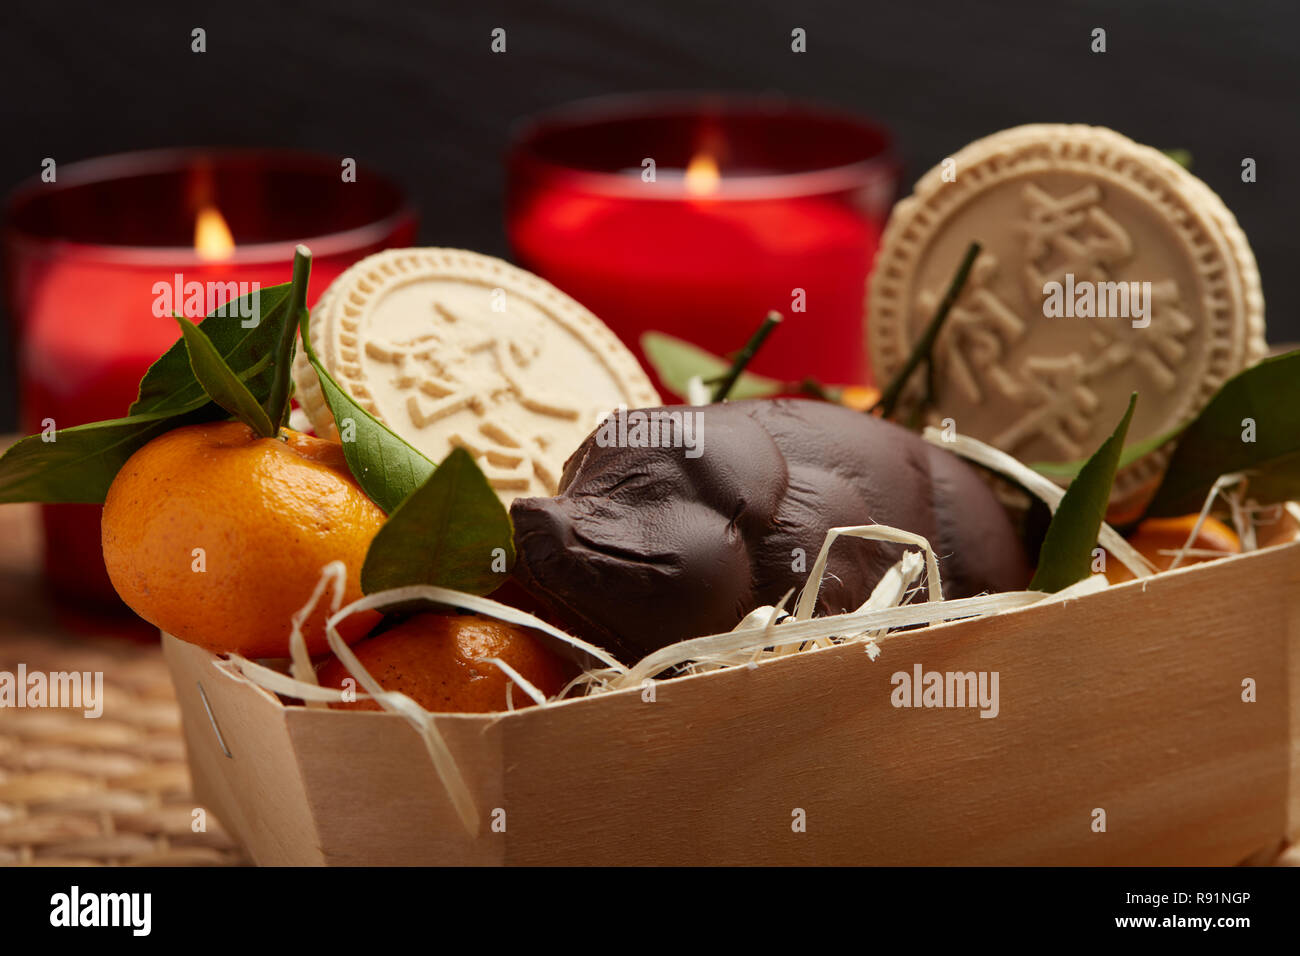 Chinese or Lunar New Year Basket Stock Photo